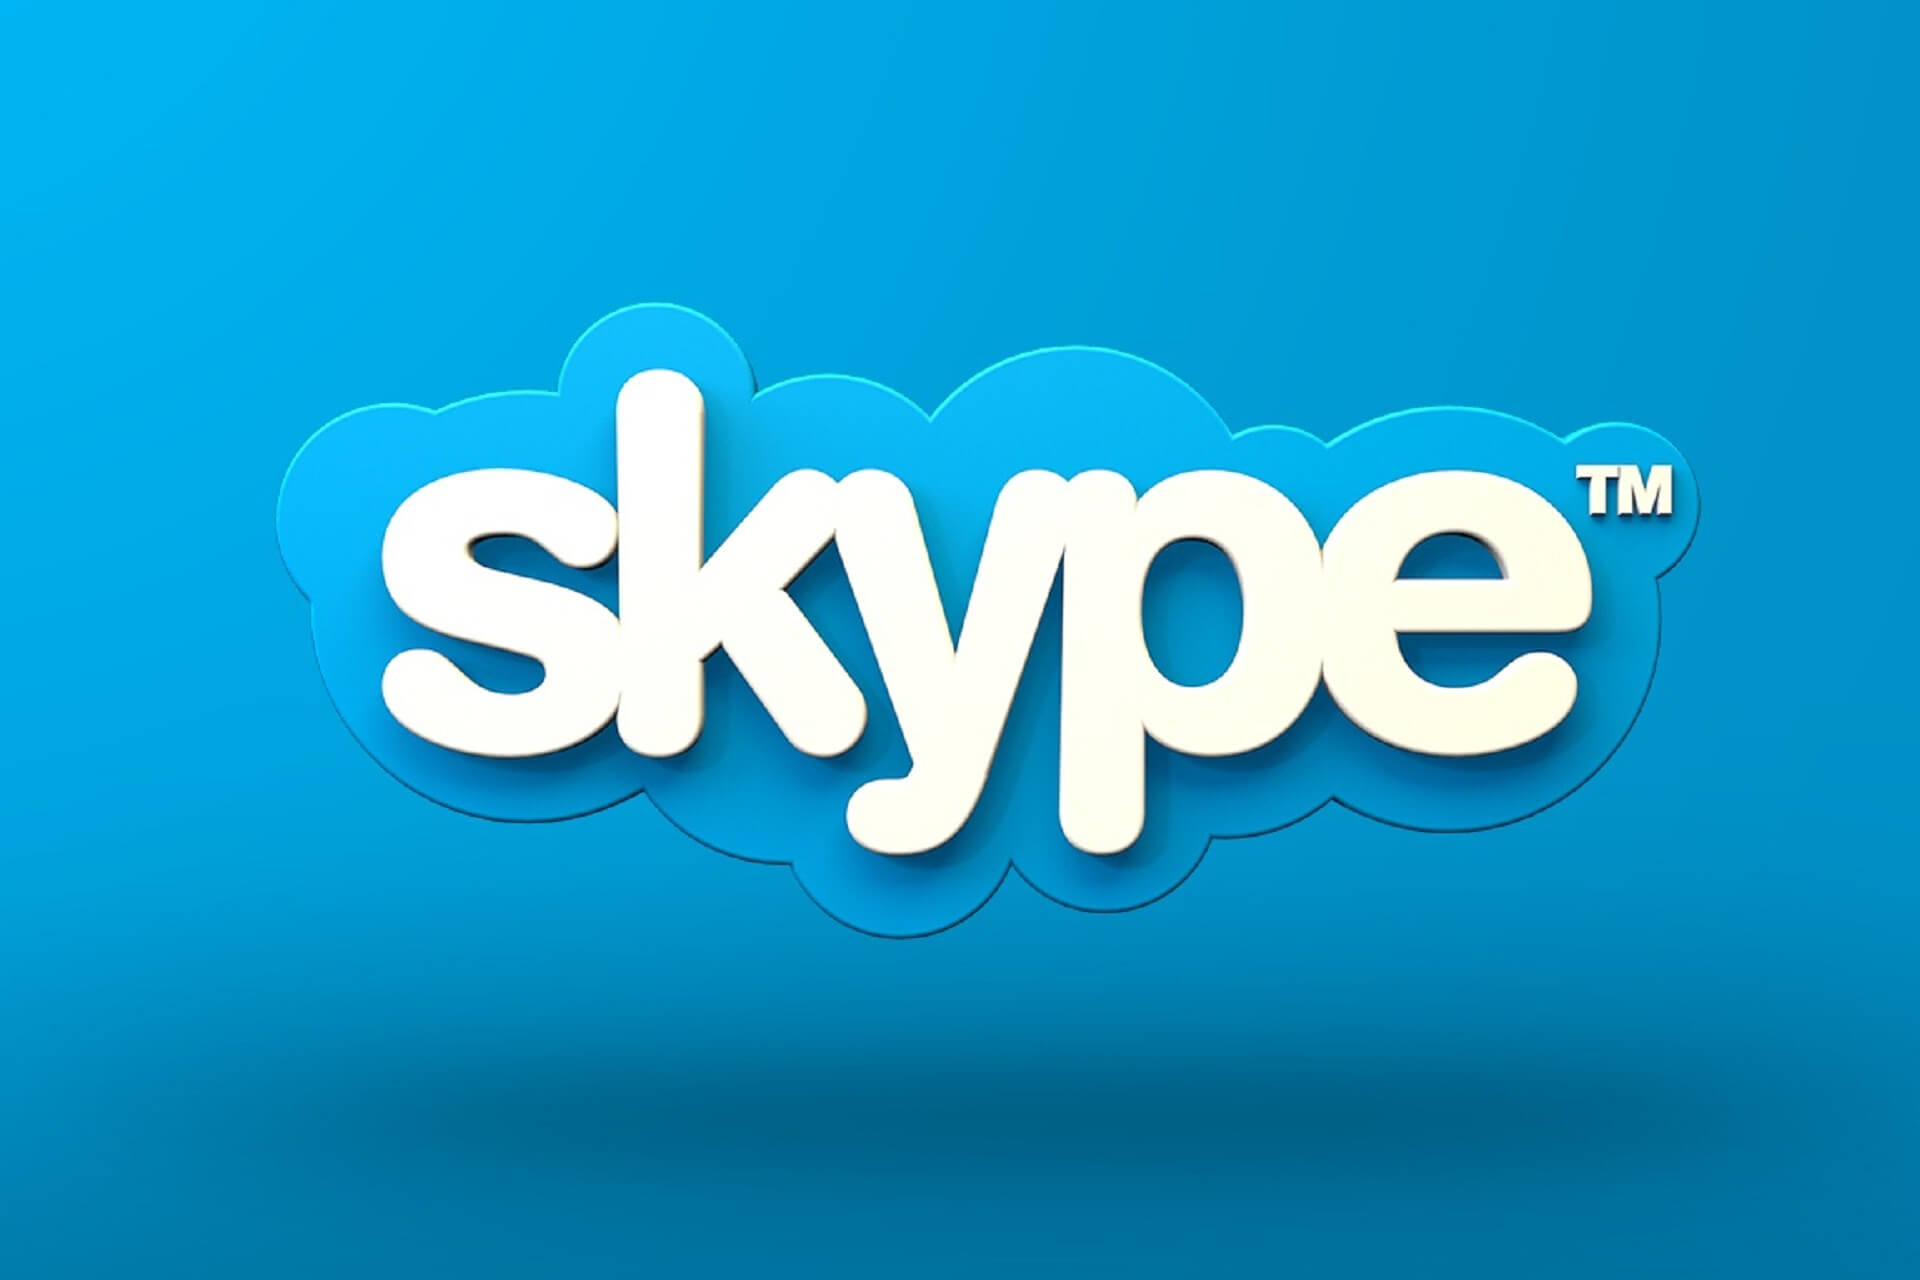 how to delete skype account on mobile